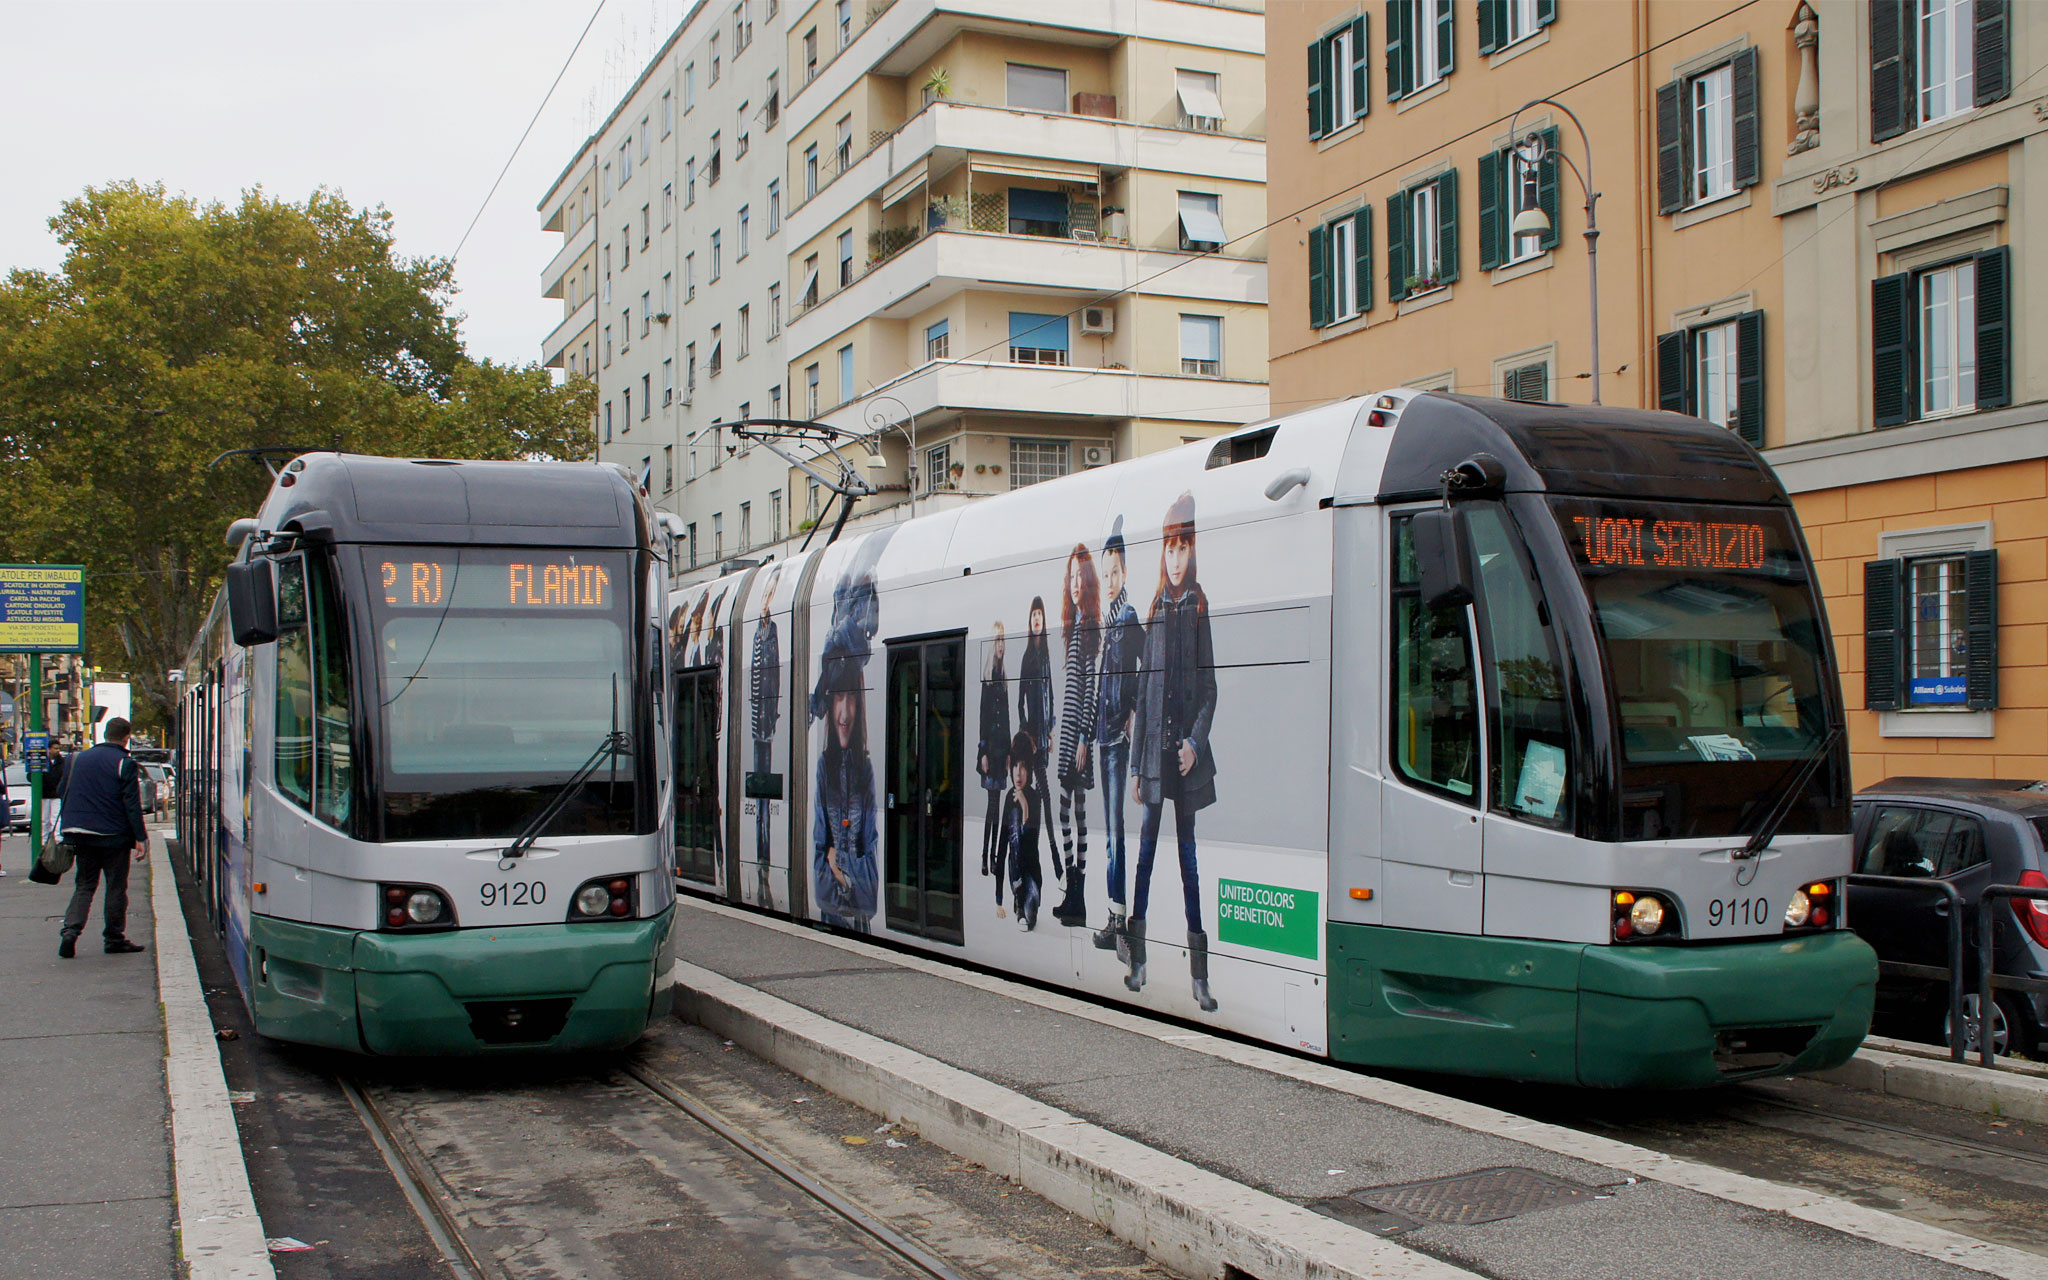 Figure 10: 9200 Series were made right after 9100. They are either 8-axle or 10-axle trams, with 100% low-floor layout. 9200 Series is currently the newest model.